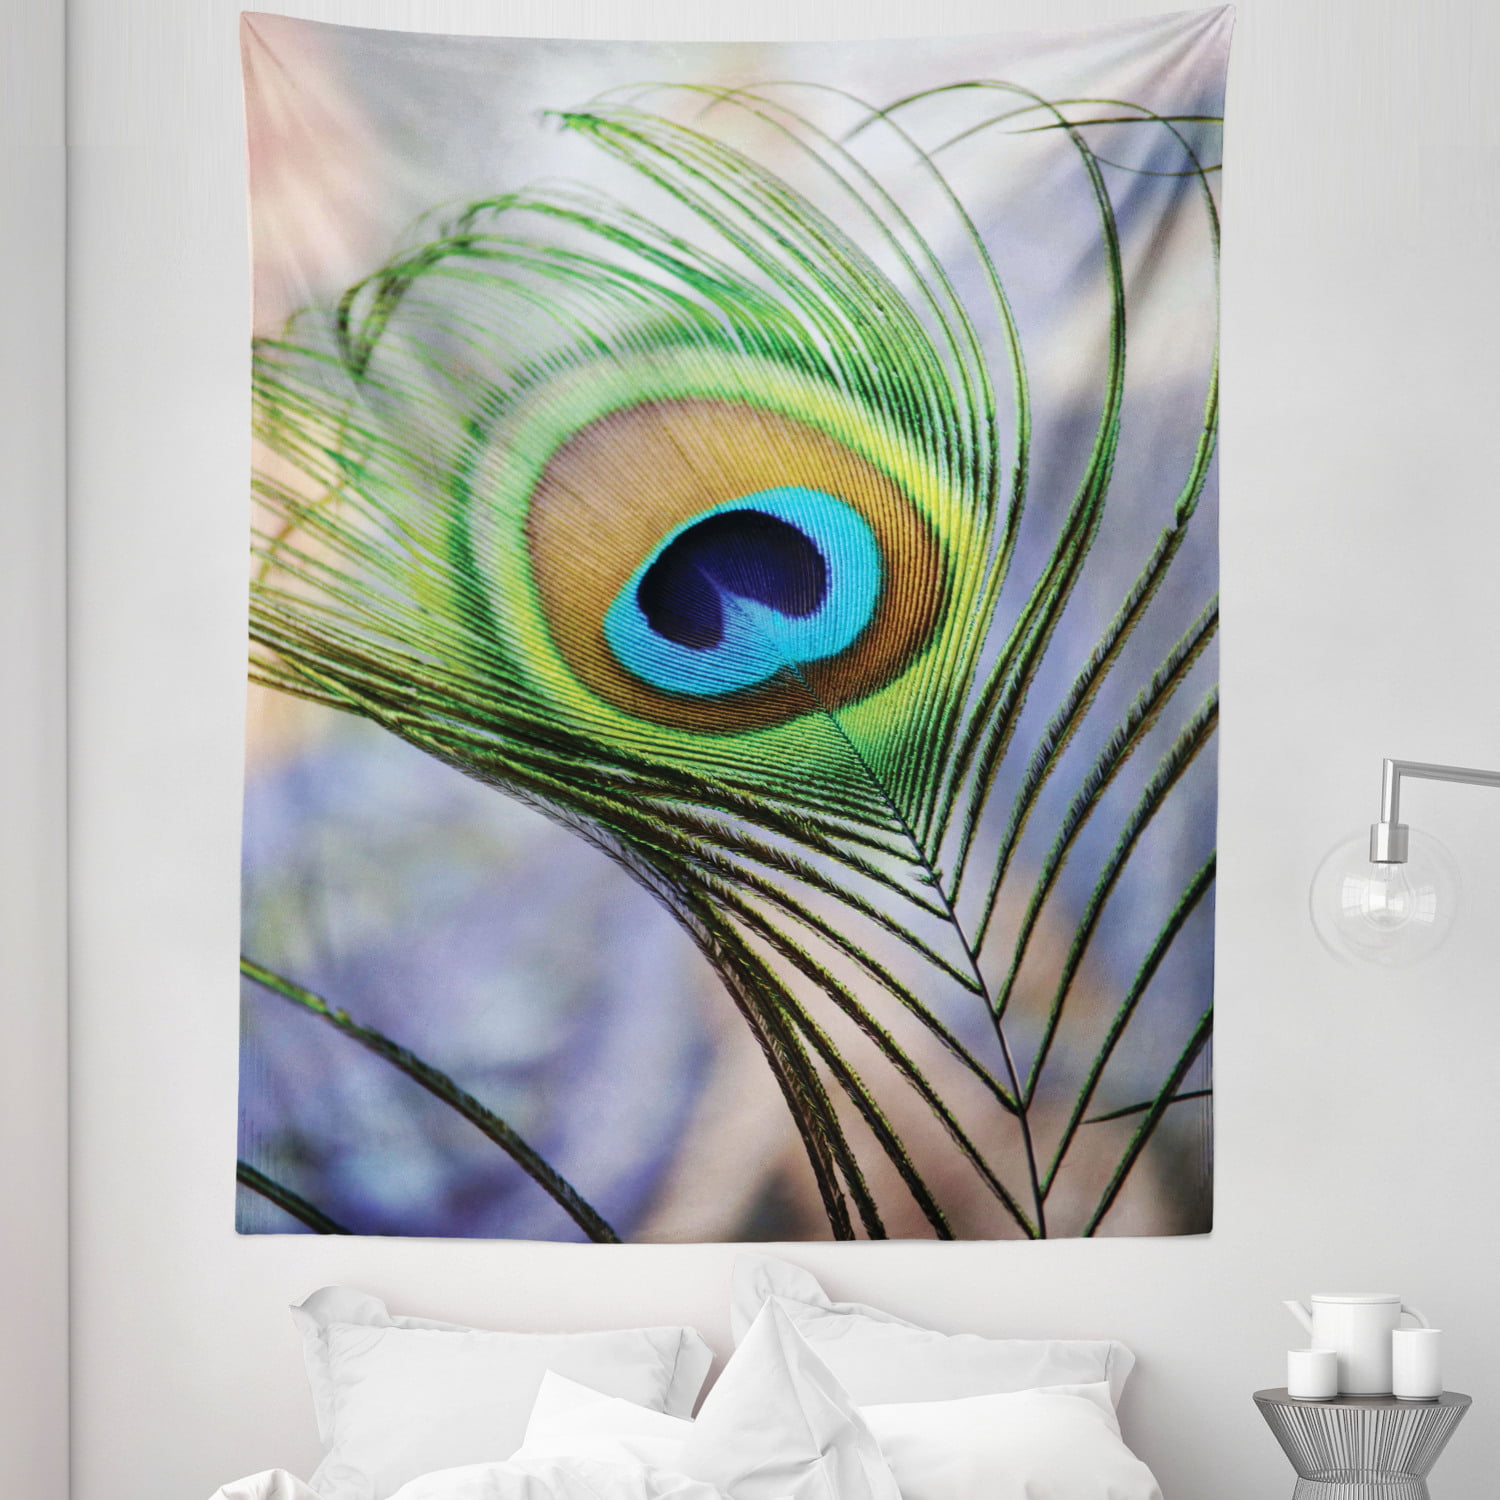 Colorful Peacock Feather Tapestry Art Print Wall Hanging Tapestry Room Decor Hot 